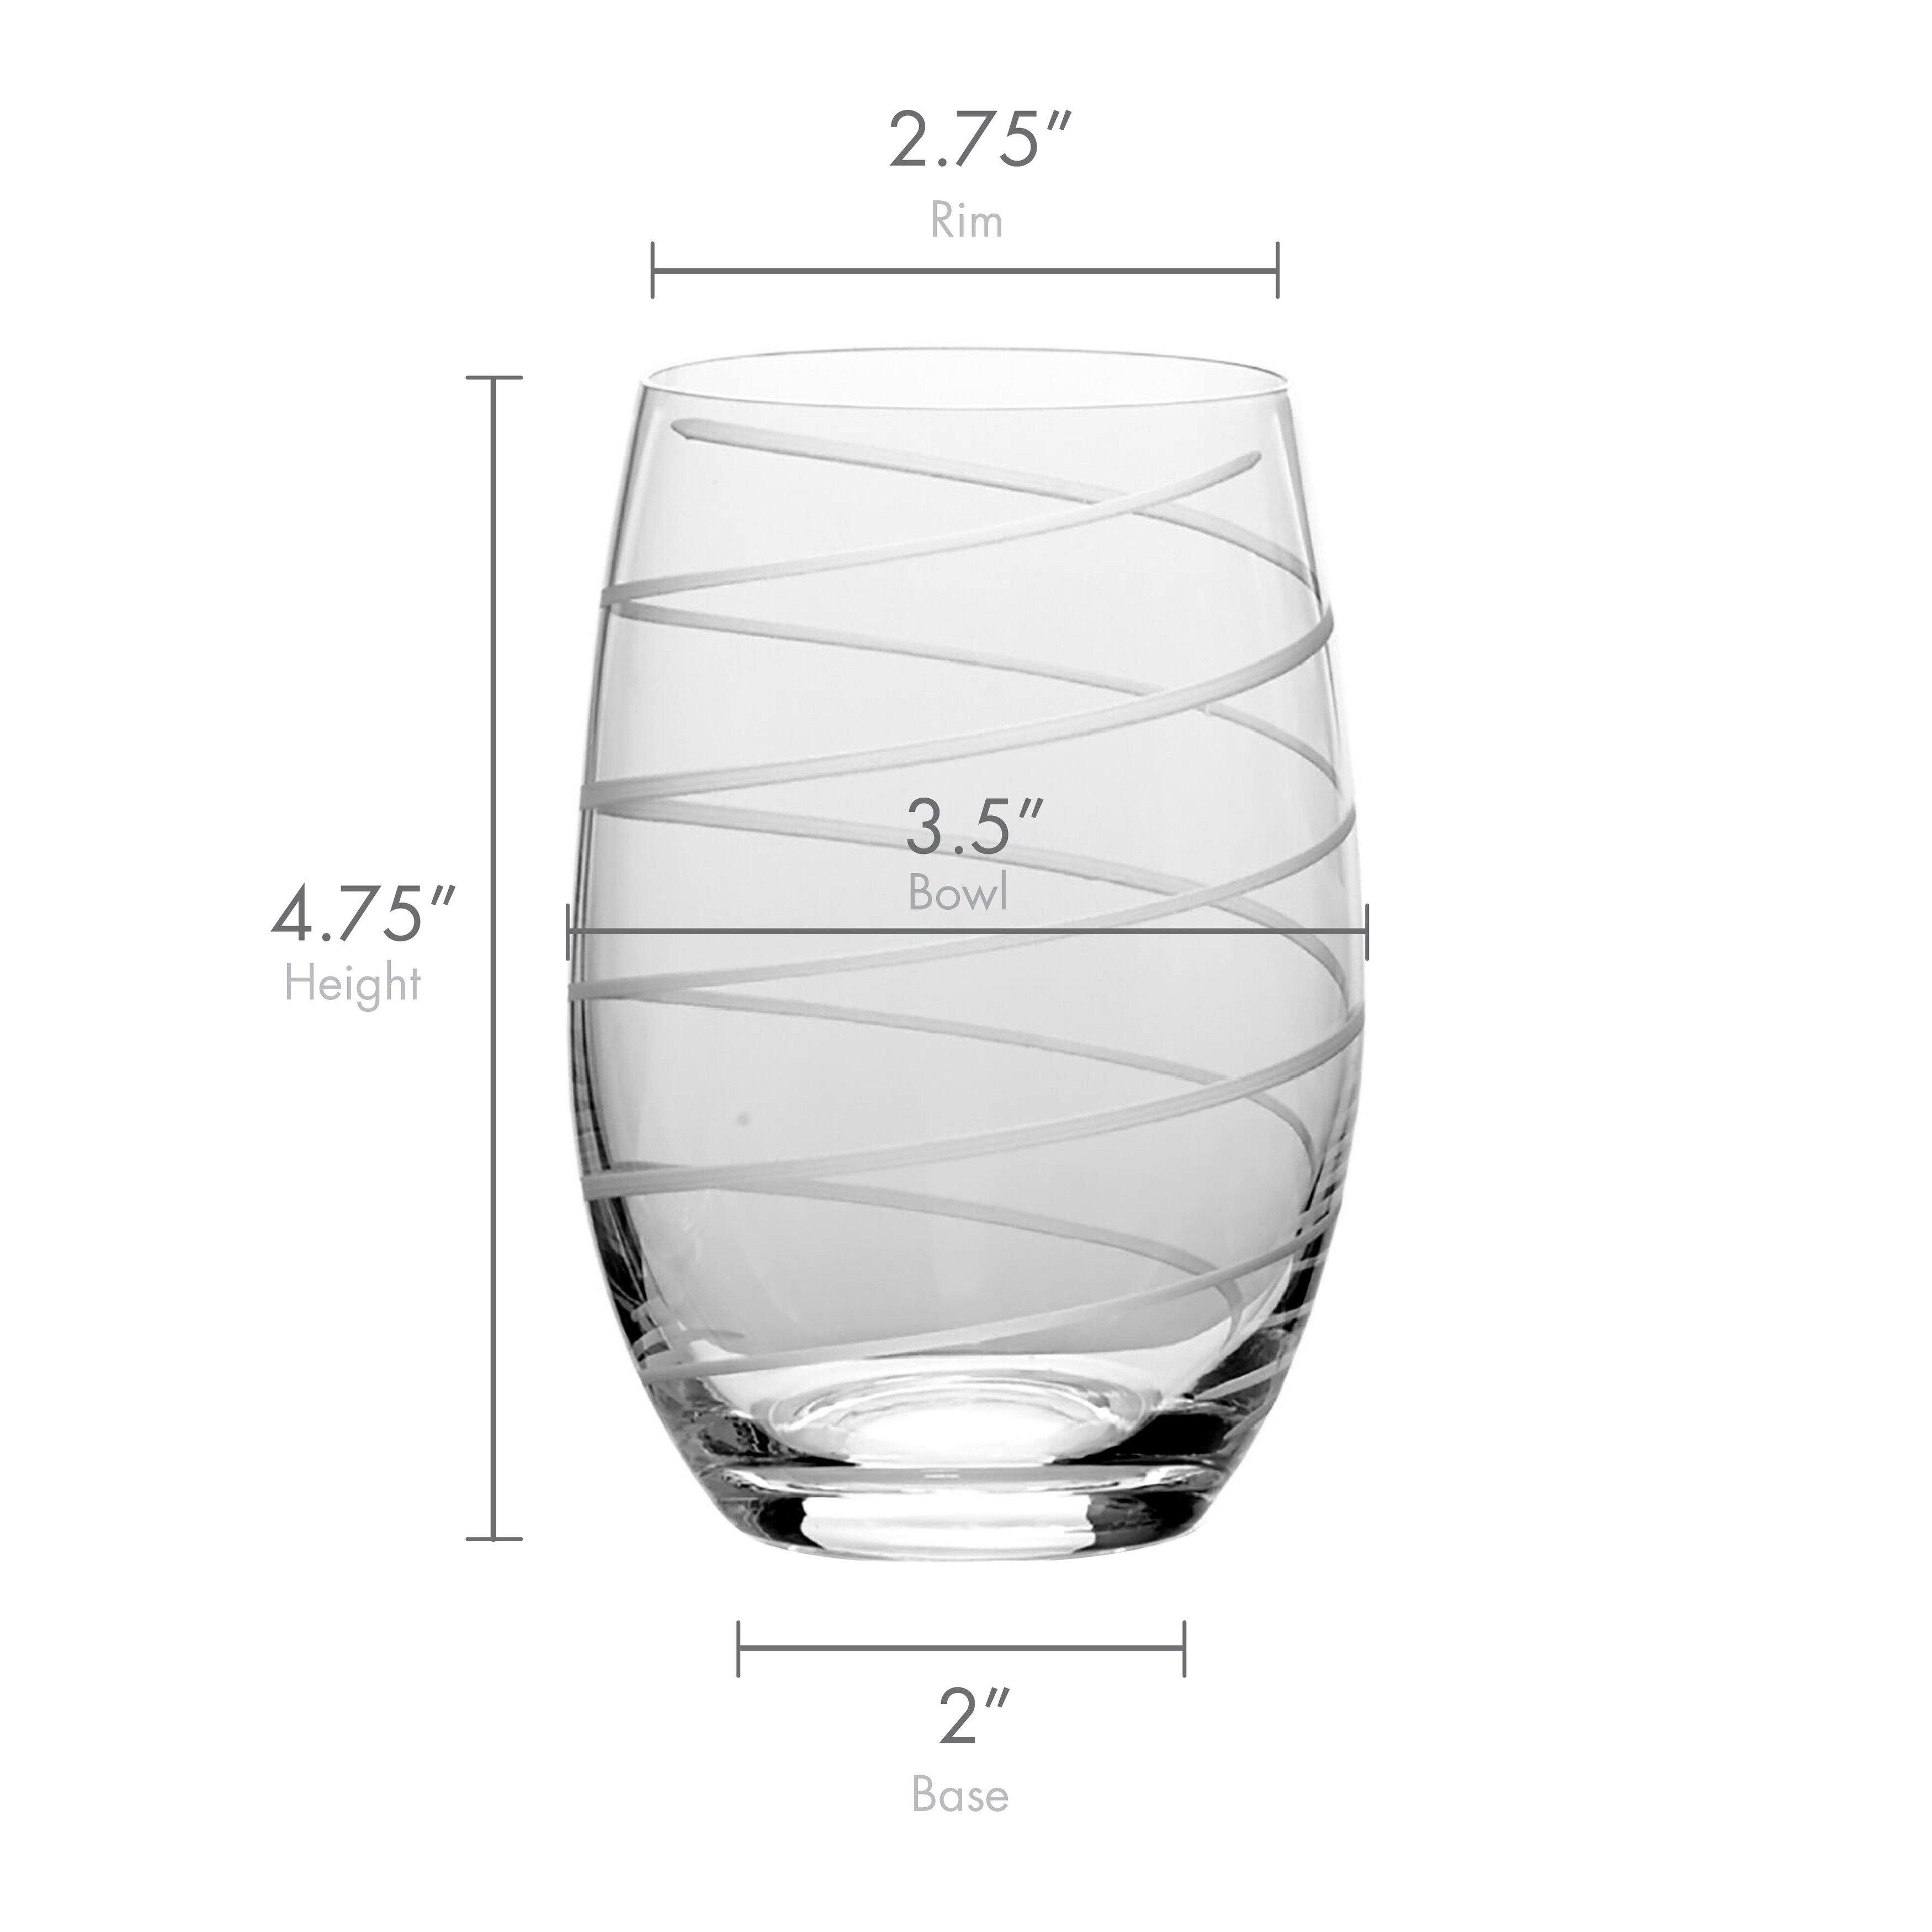 https://ak1.ostkcdn.com/images/products/is/images/direct/5b1ba01ce0d679a1c80e8ccce5981f7e2bd45869/Mikasa-%27Cheers%27-17-oz.-Stemless-Wine-Glass-%28Set-of-4%29.jpg